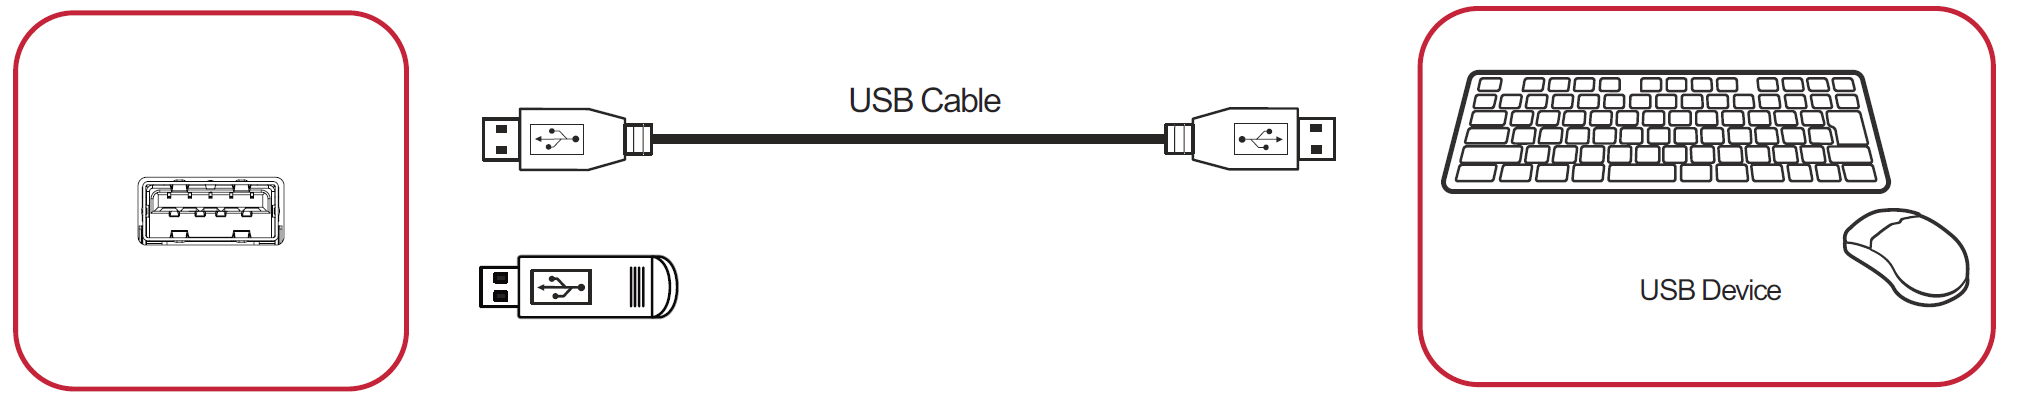 File:IFP52 USB Connection.png